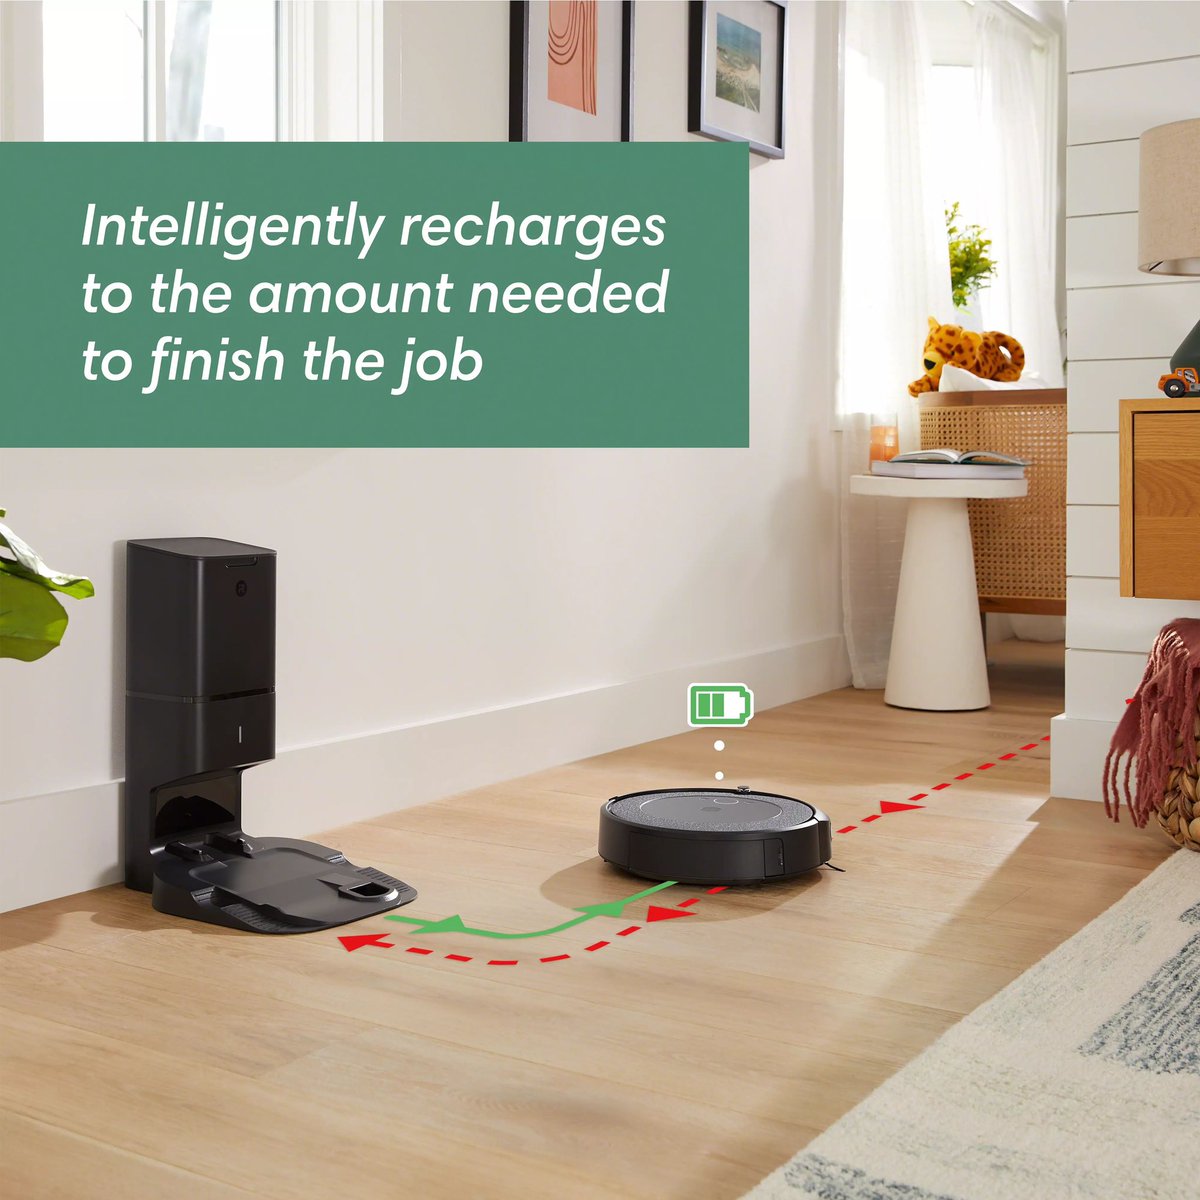 Battery juices running low? Your #Roomba i3+ EVO will determine how much more of a charge it needs to finish its mission and get back to cleaning ASAP.